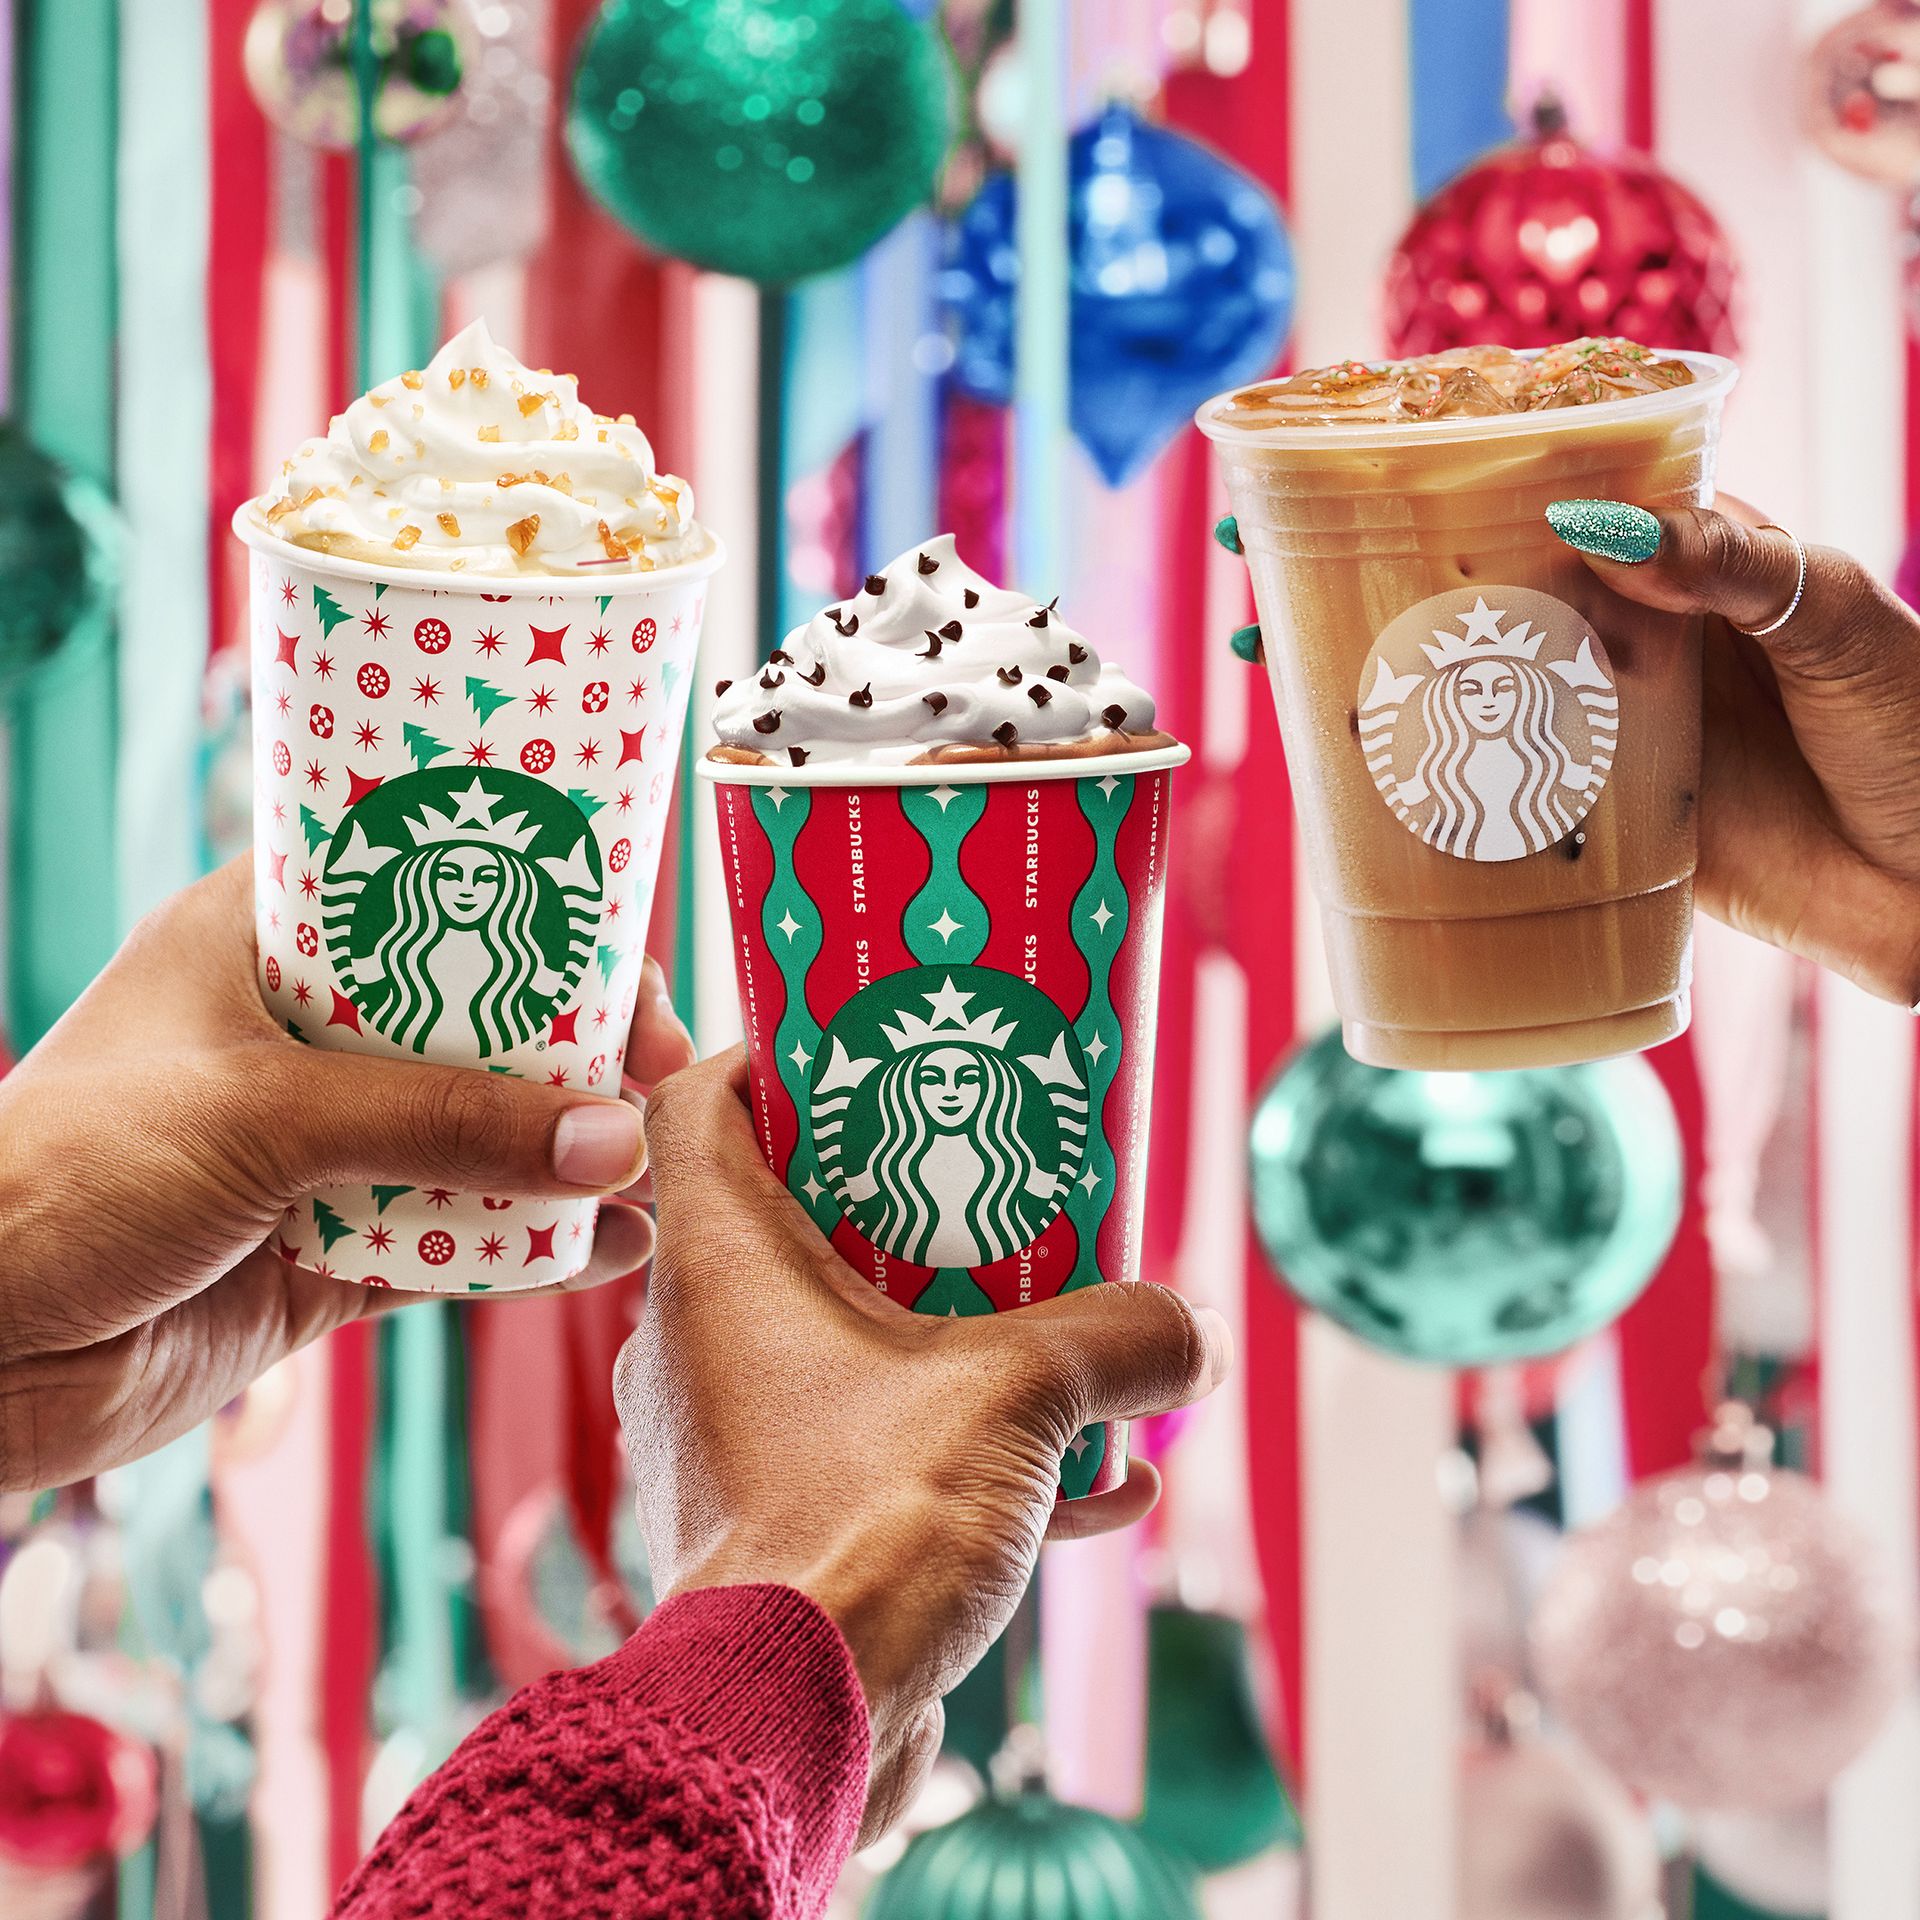 Starbucks' holiday cups will be back this week